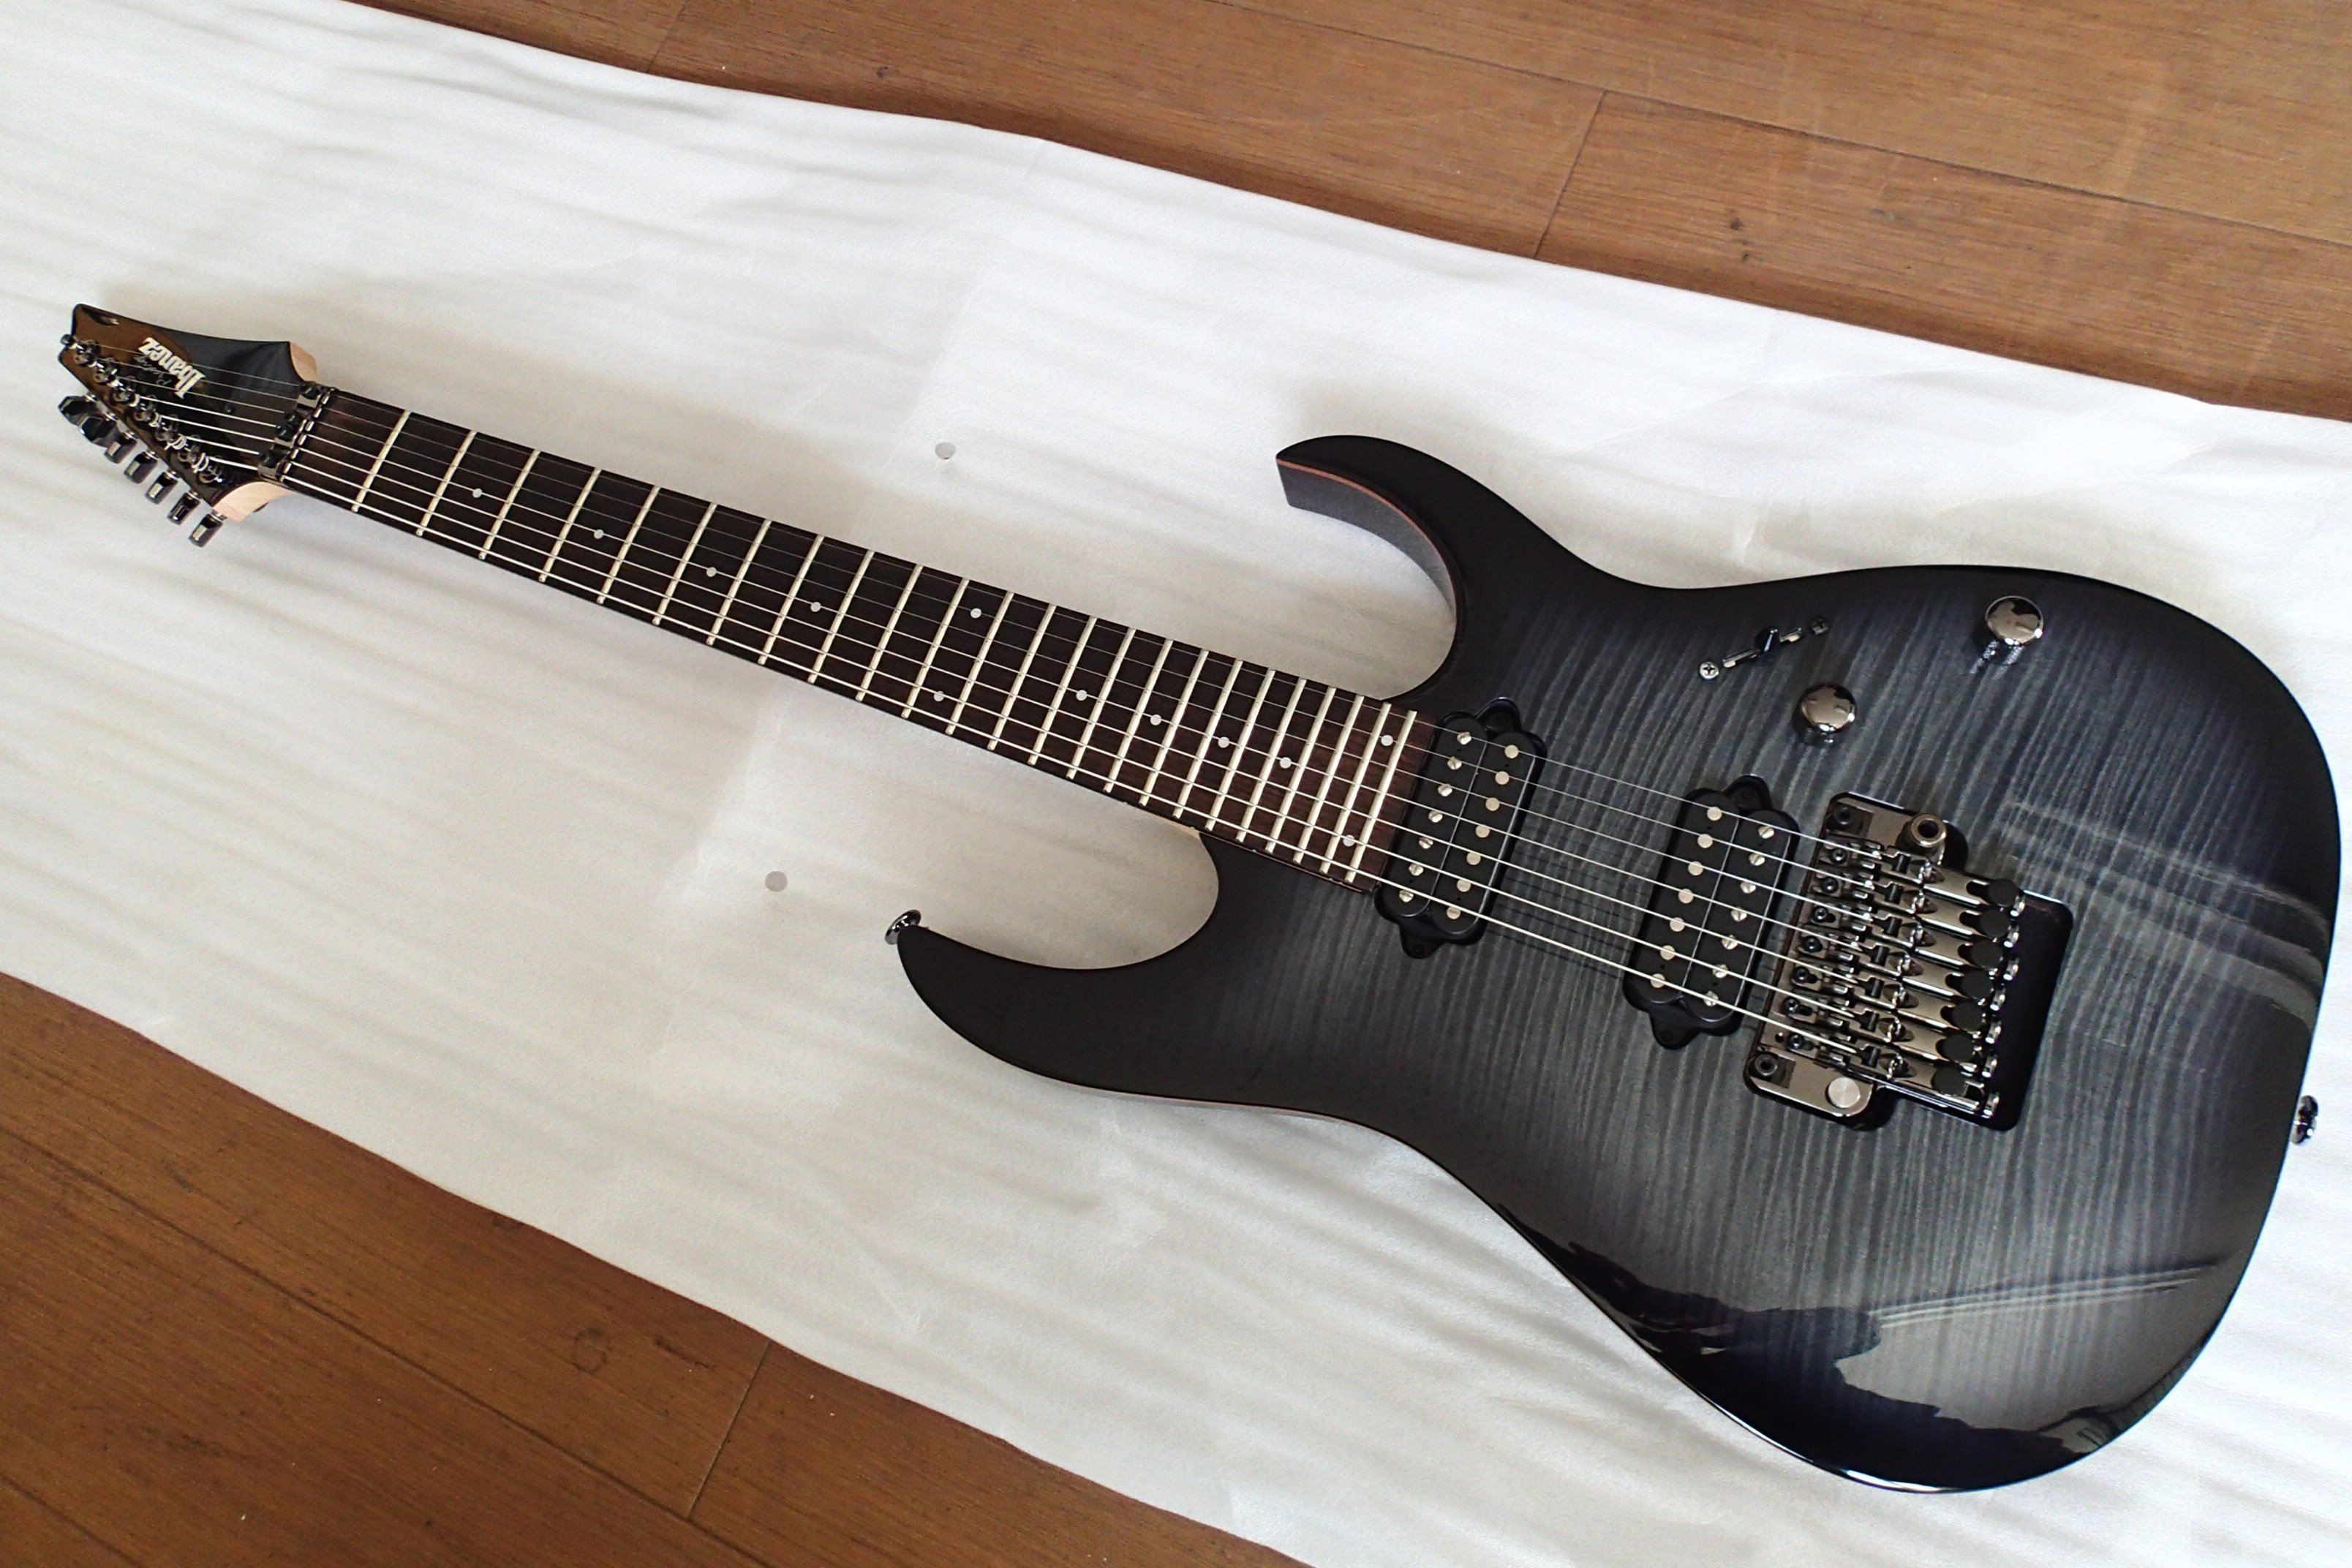 Ibanez RG2727FZA DIMARZIO DP713&714 Titan7 取付け ヌケの良い７弦 